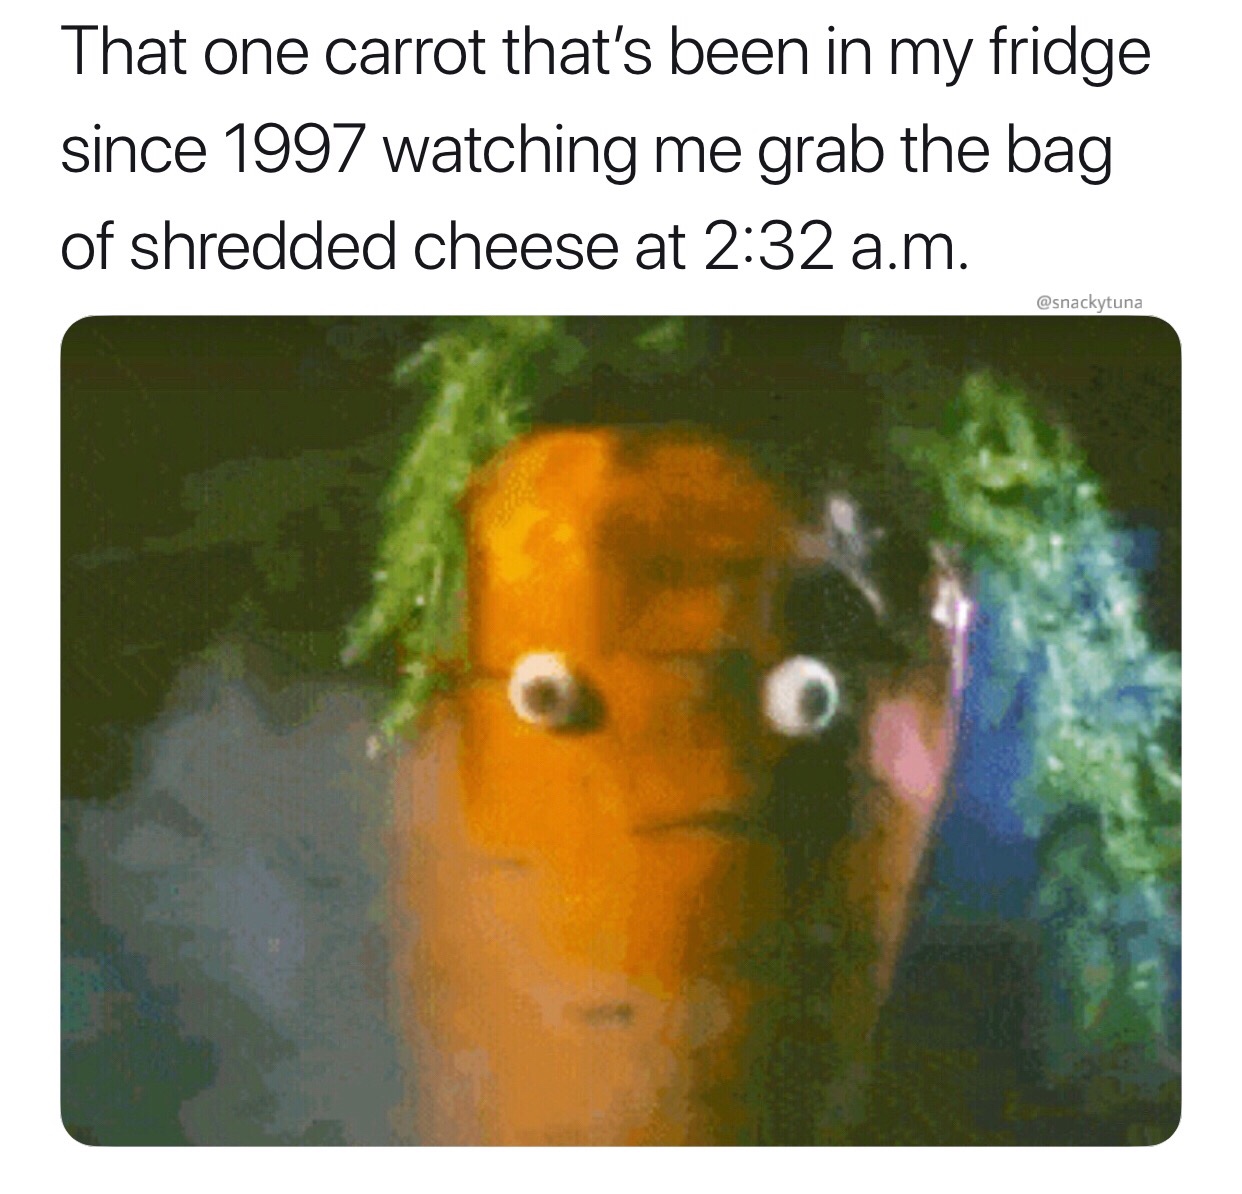 one carrot thats been in my fridge since 1997 - That one carrot that's been in my fridge since 1997 watching me grab the bag of shredded cheese at a.m.